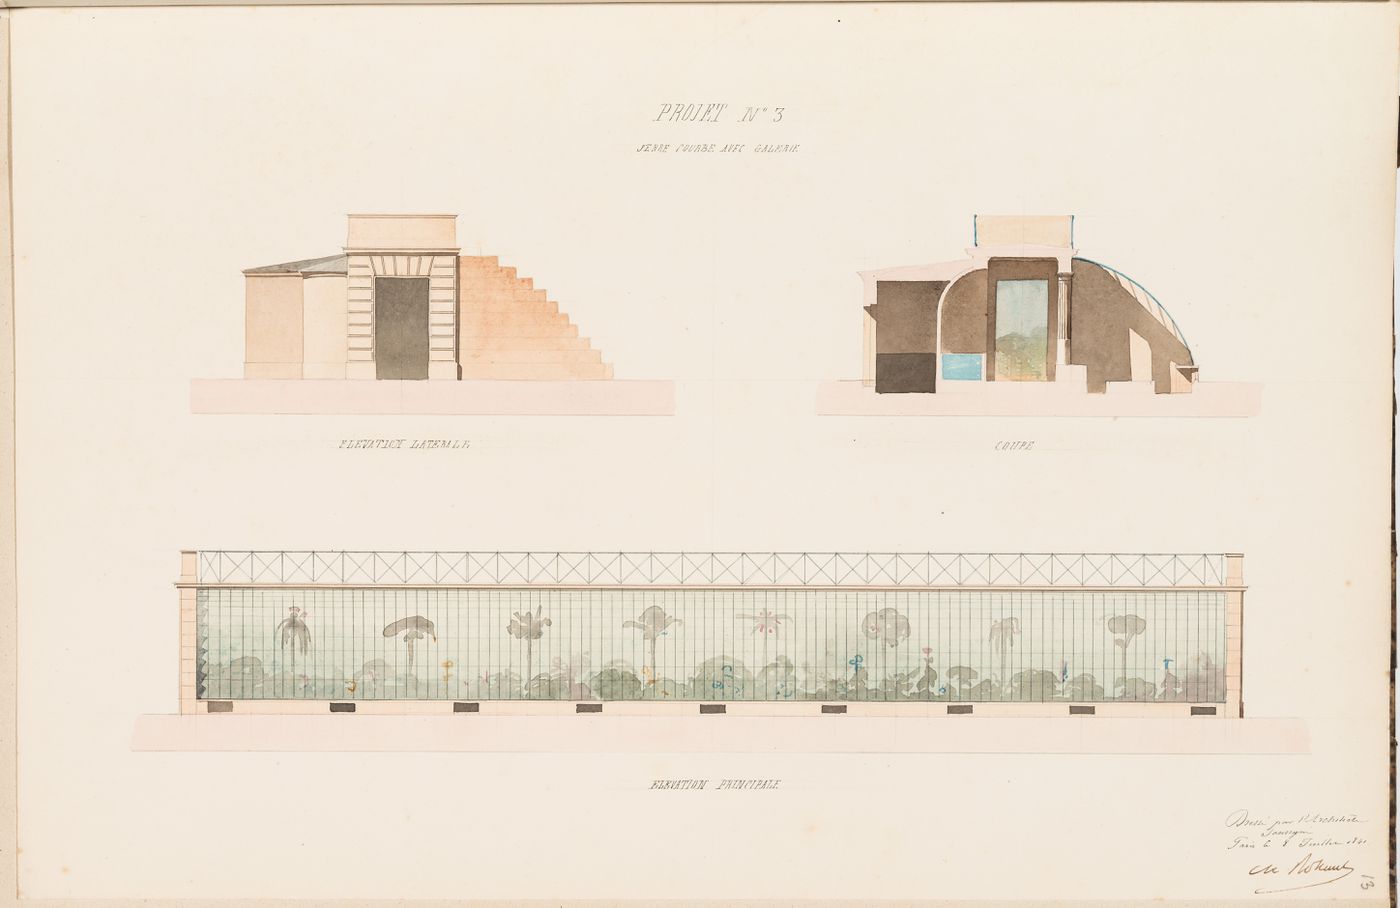 Principal and side elevations, and cross section for a "serre chaude" with a curved glass roof and a gallery for Monsieur Fauquet-Lemaitre